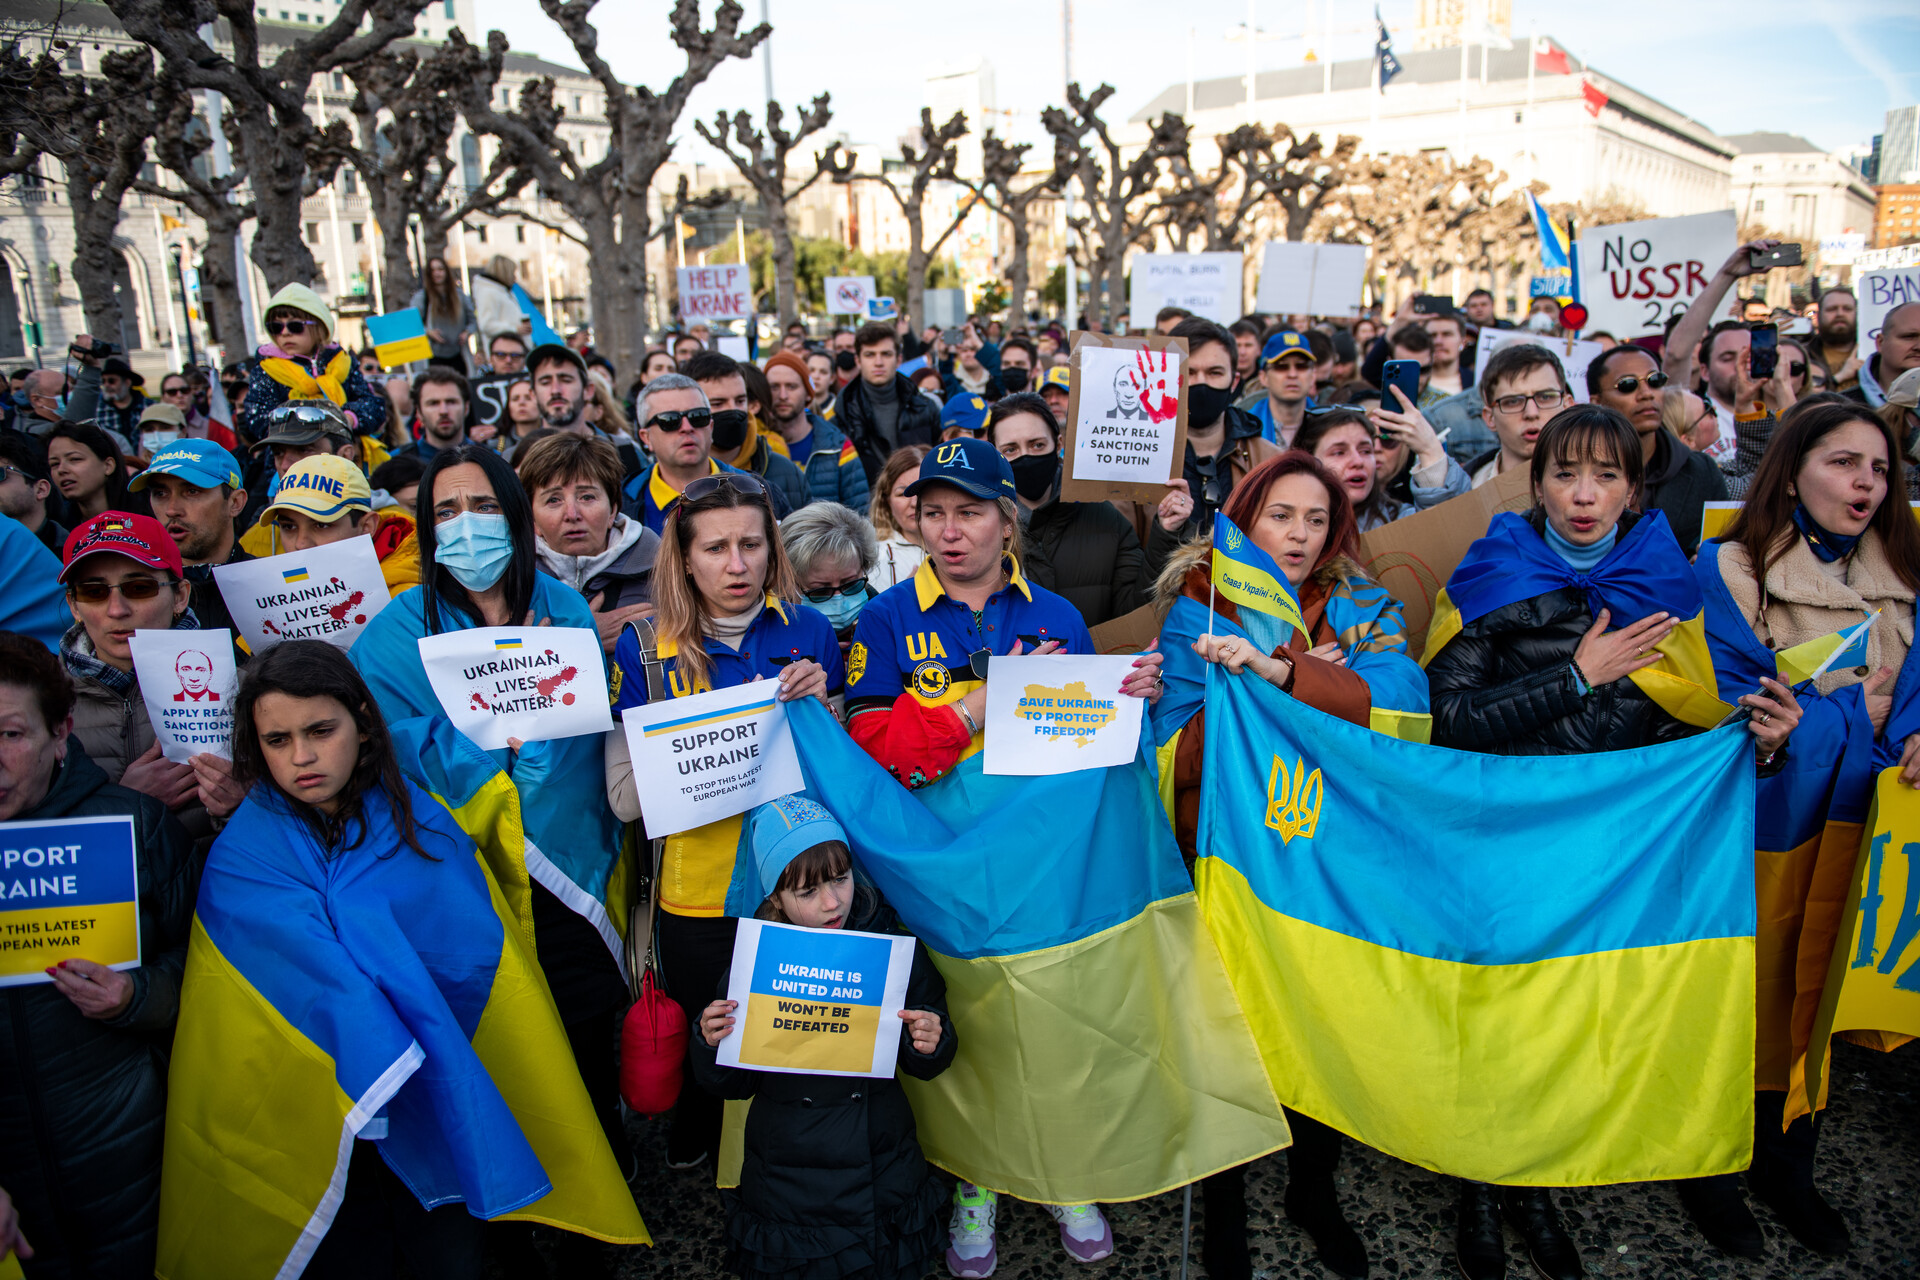 A group of people stand together holding blue and yellow Ukrainian flags and small signs in support of Ukraine.